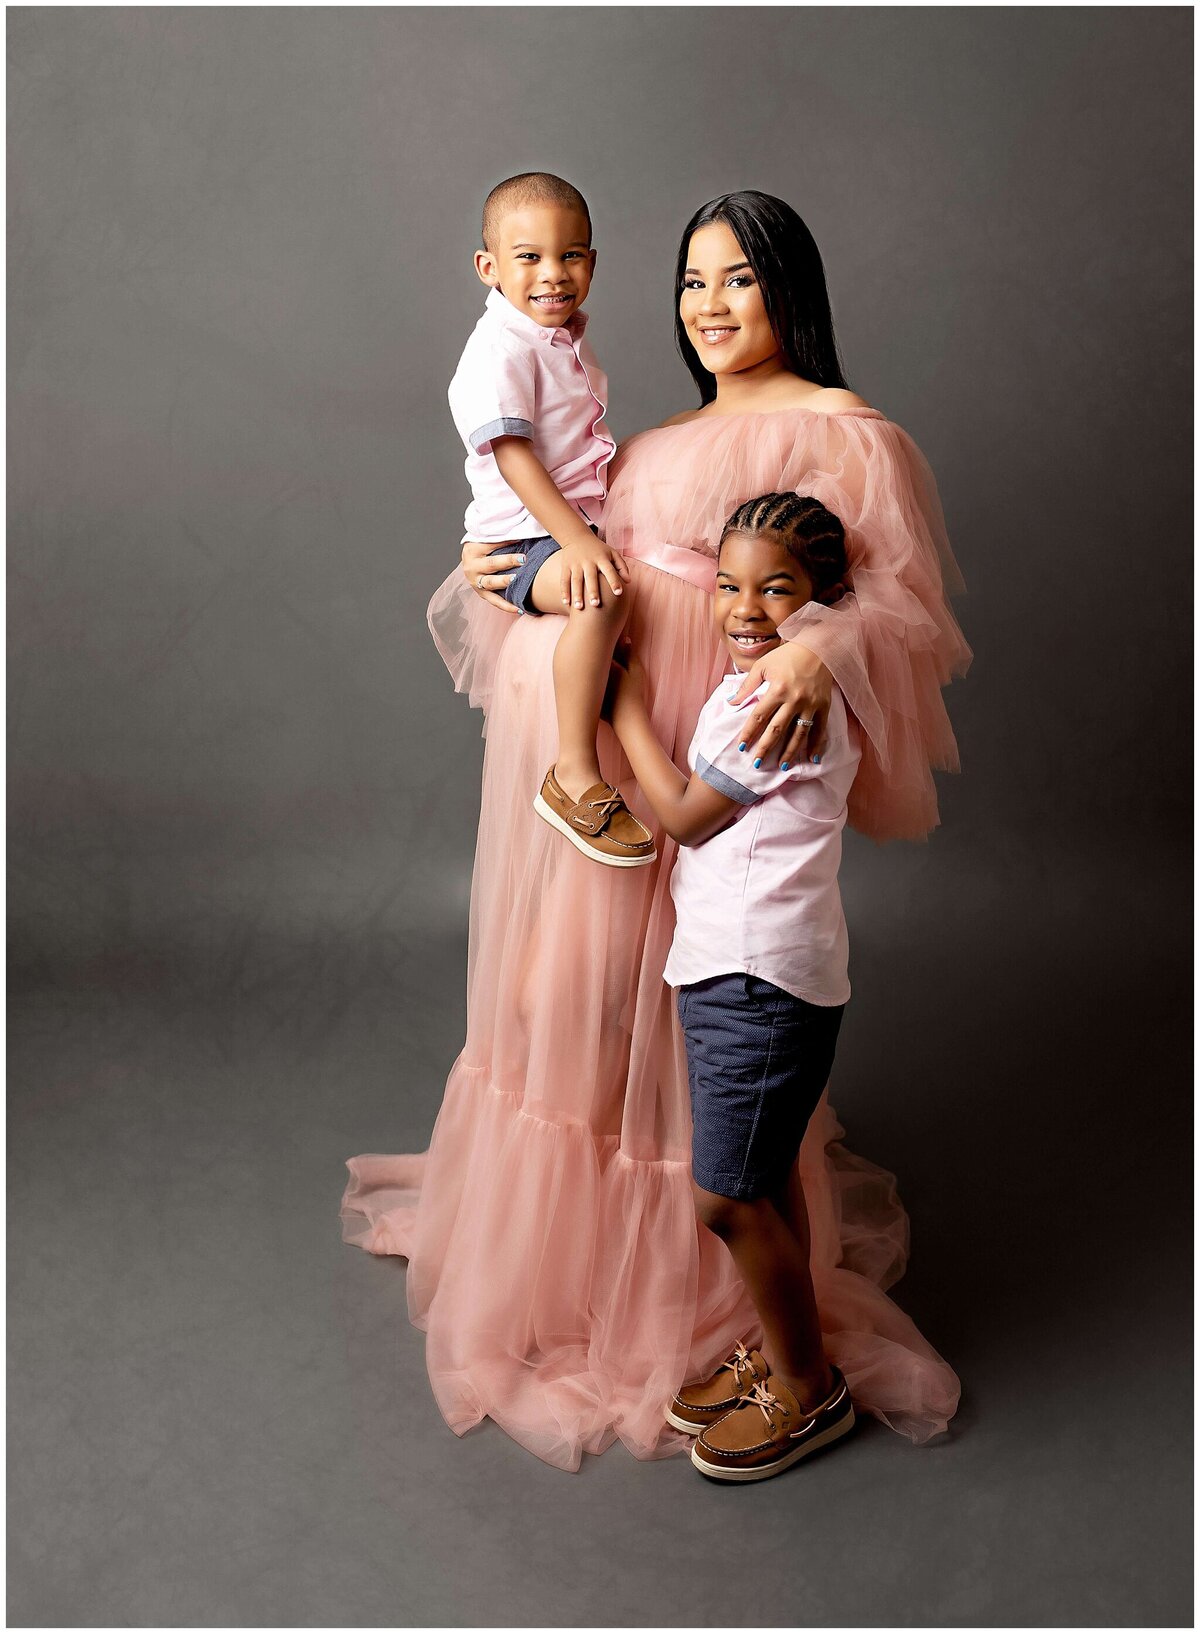 A mother, heavily pregnant stands holding her younger son while the other son stands next to her in a maternity portrait. The older boy lovingly embraces his mother's baby bump, creating a heartwarming and joyful family moment.